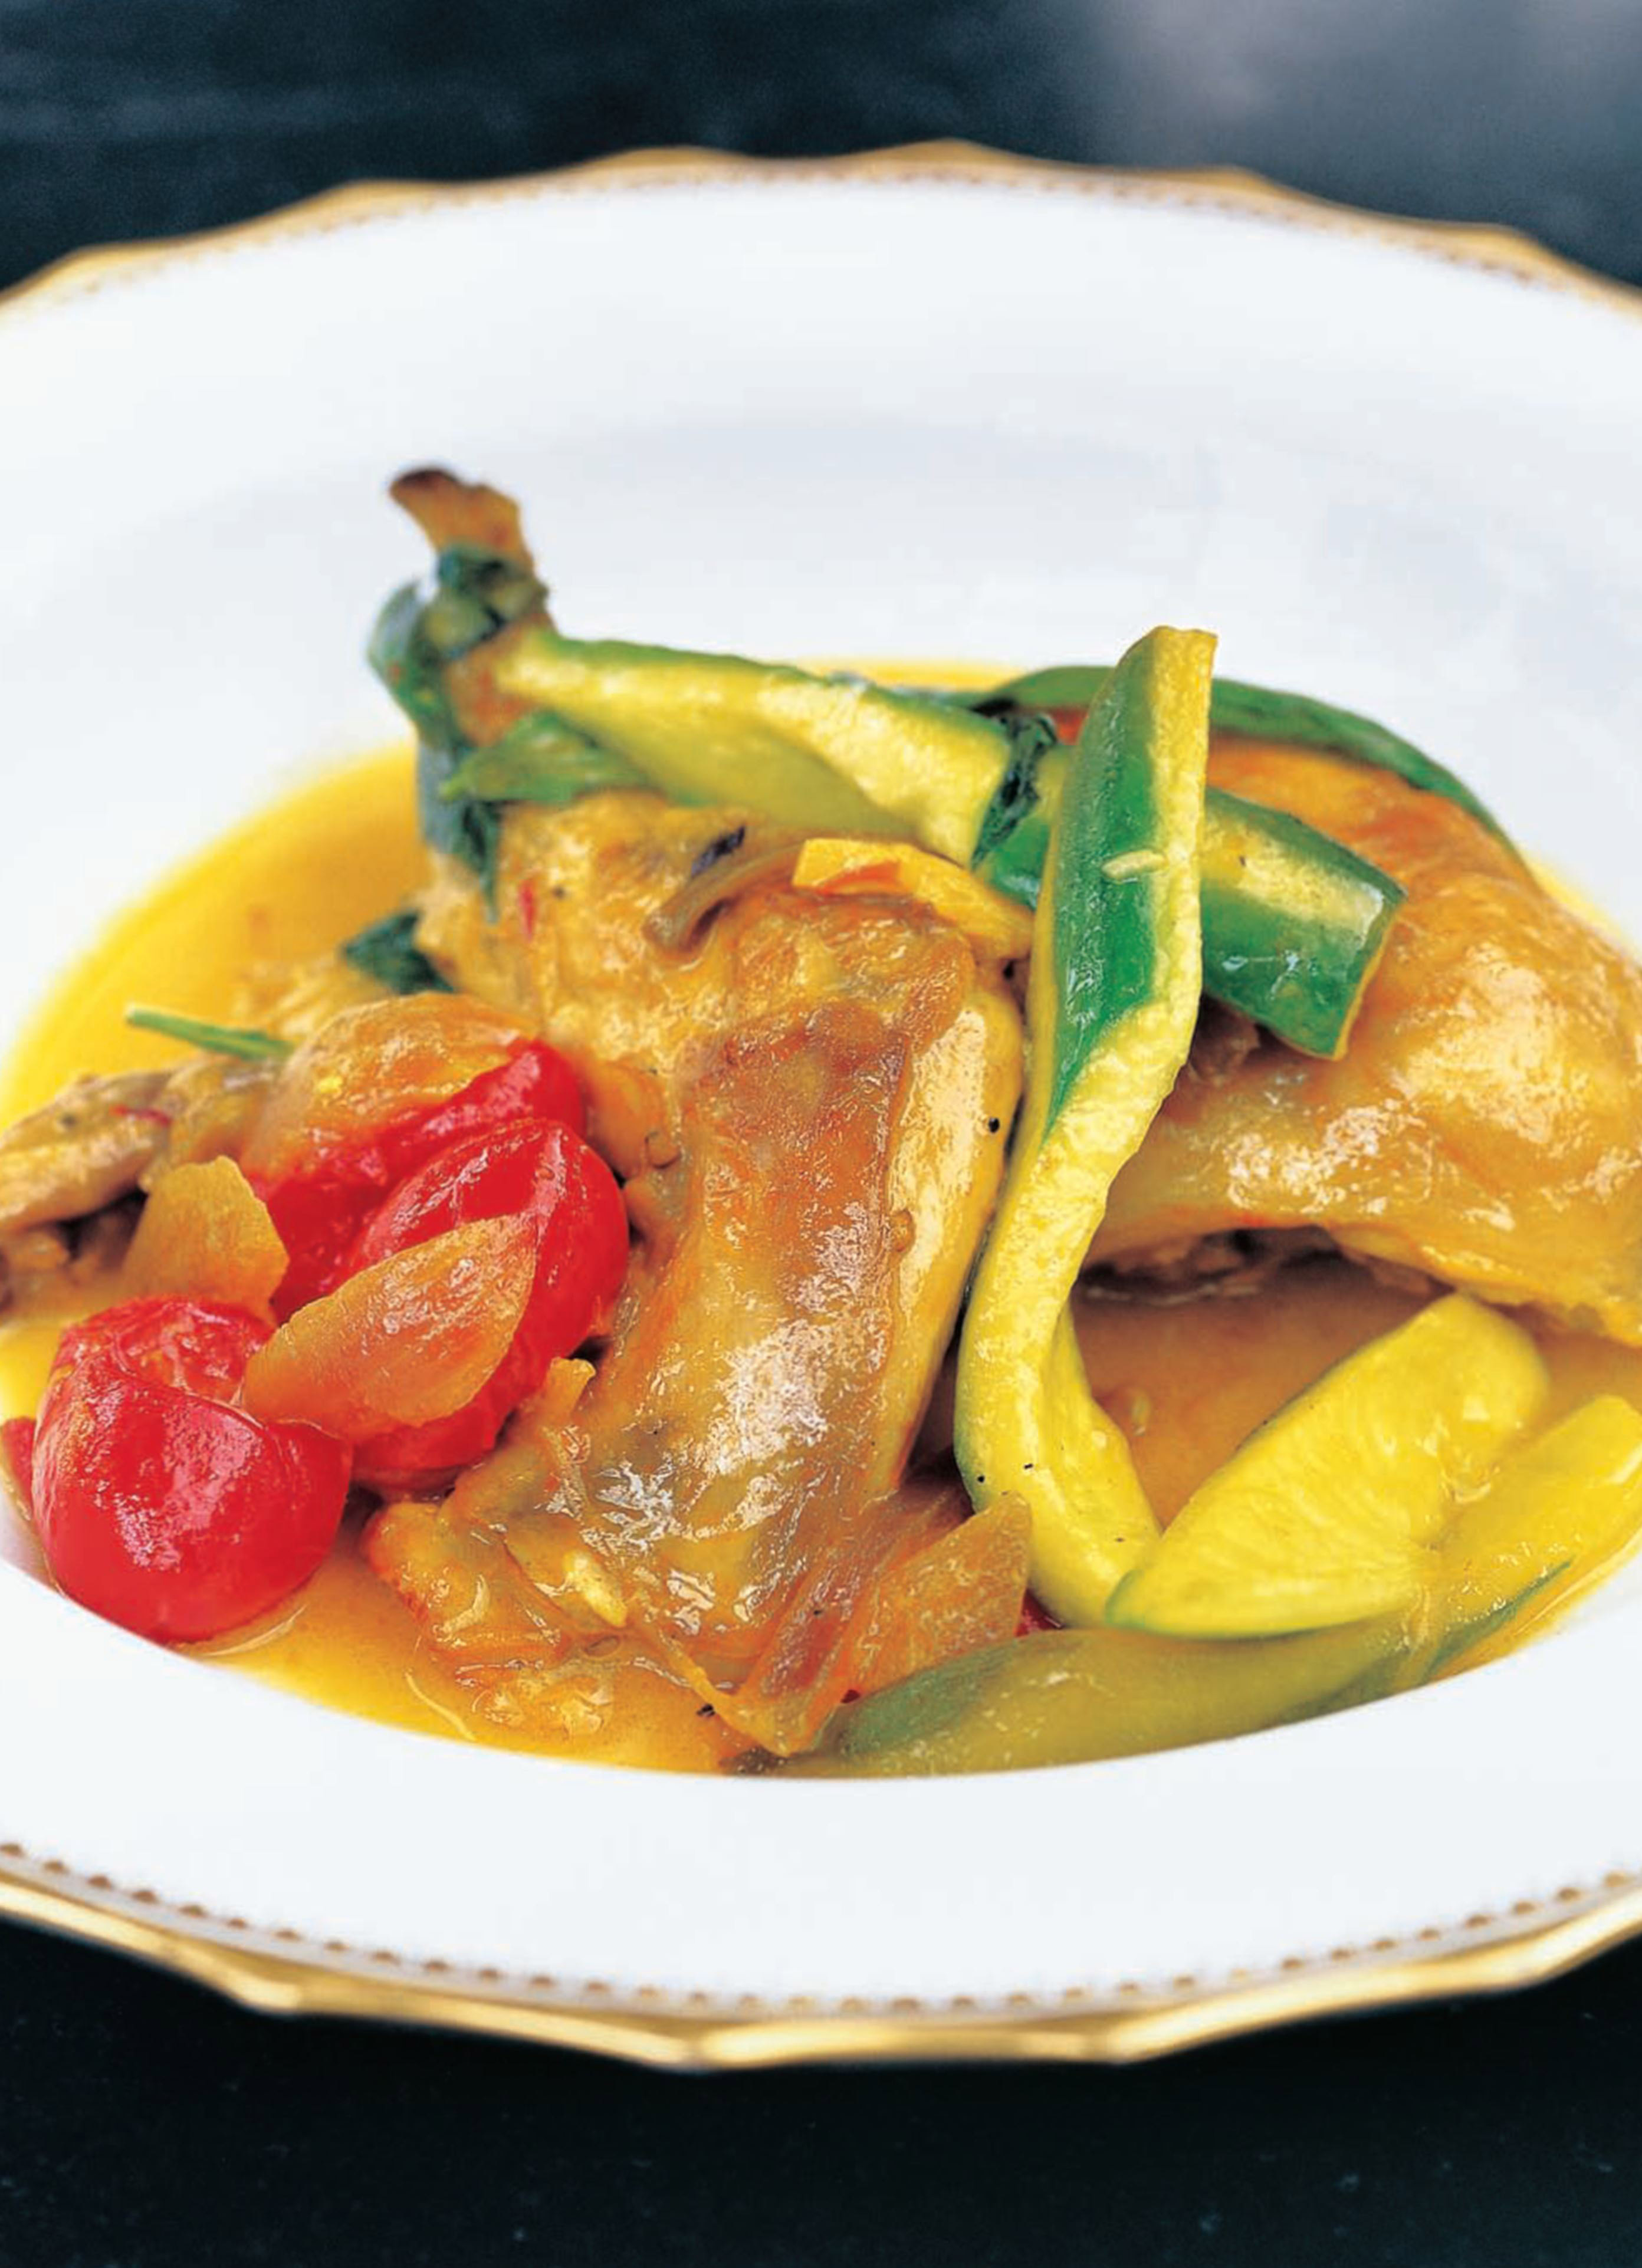 Rabbit with saffron, cucumber, tomatoes and basil